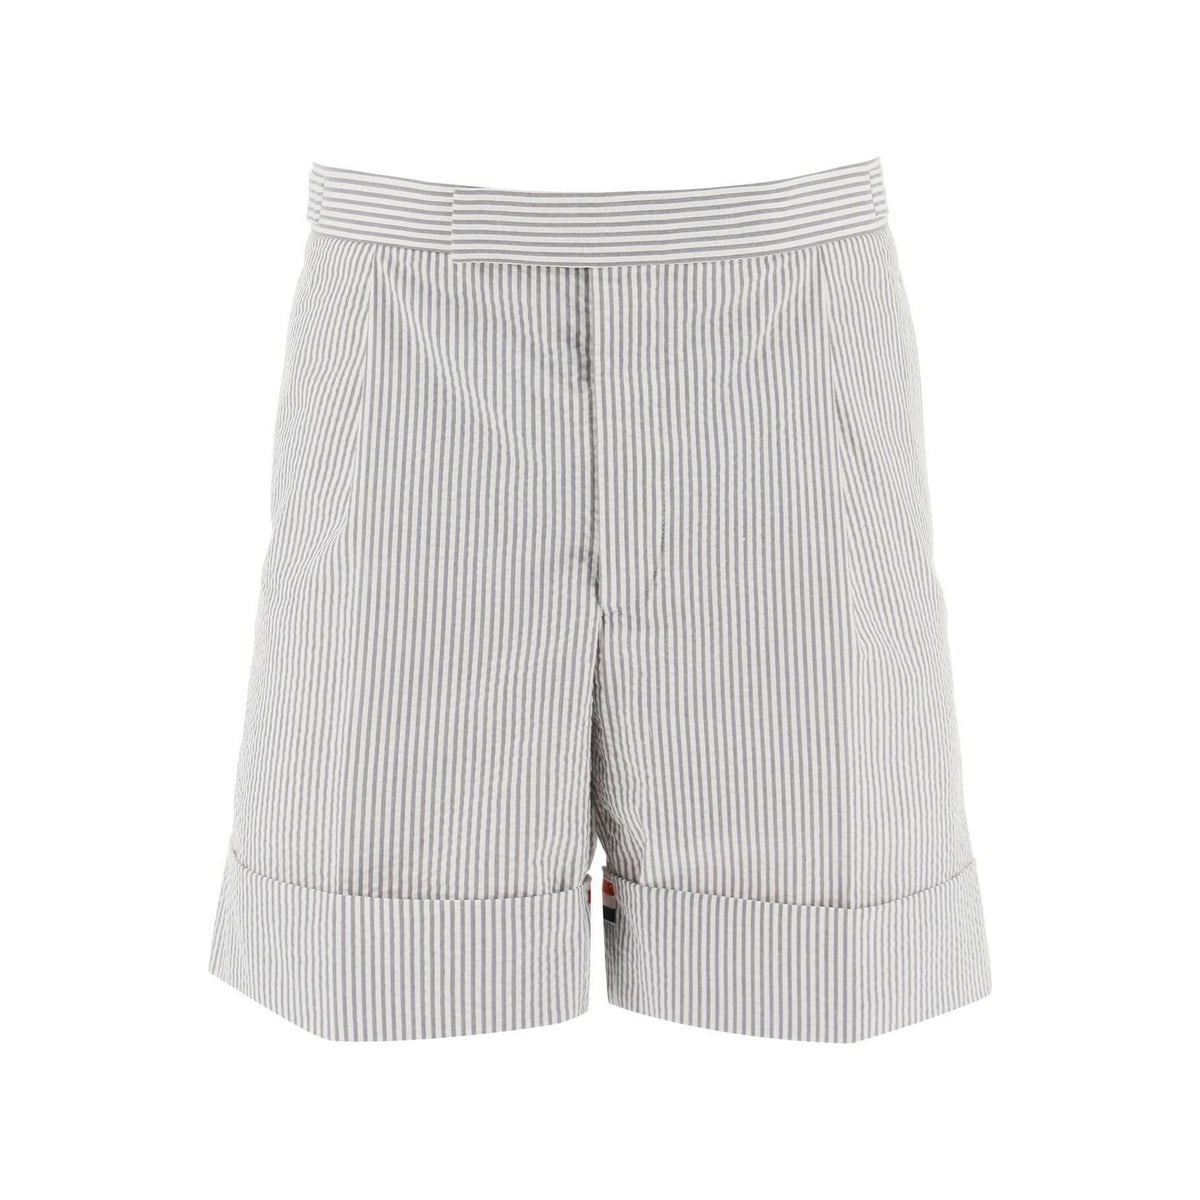 Striped Shorts With Tricolor Details THOM BROWNE JOHN JULIA.